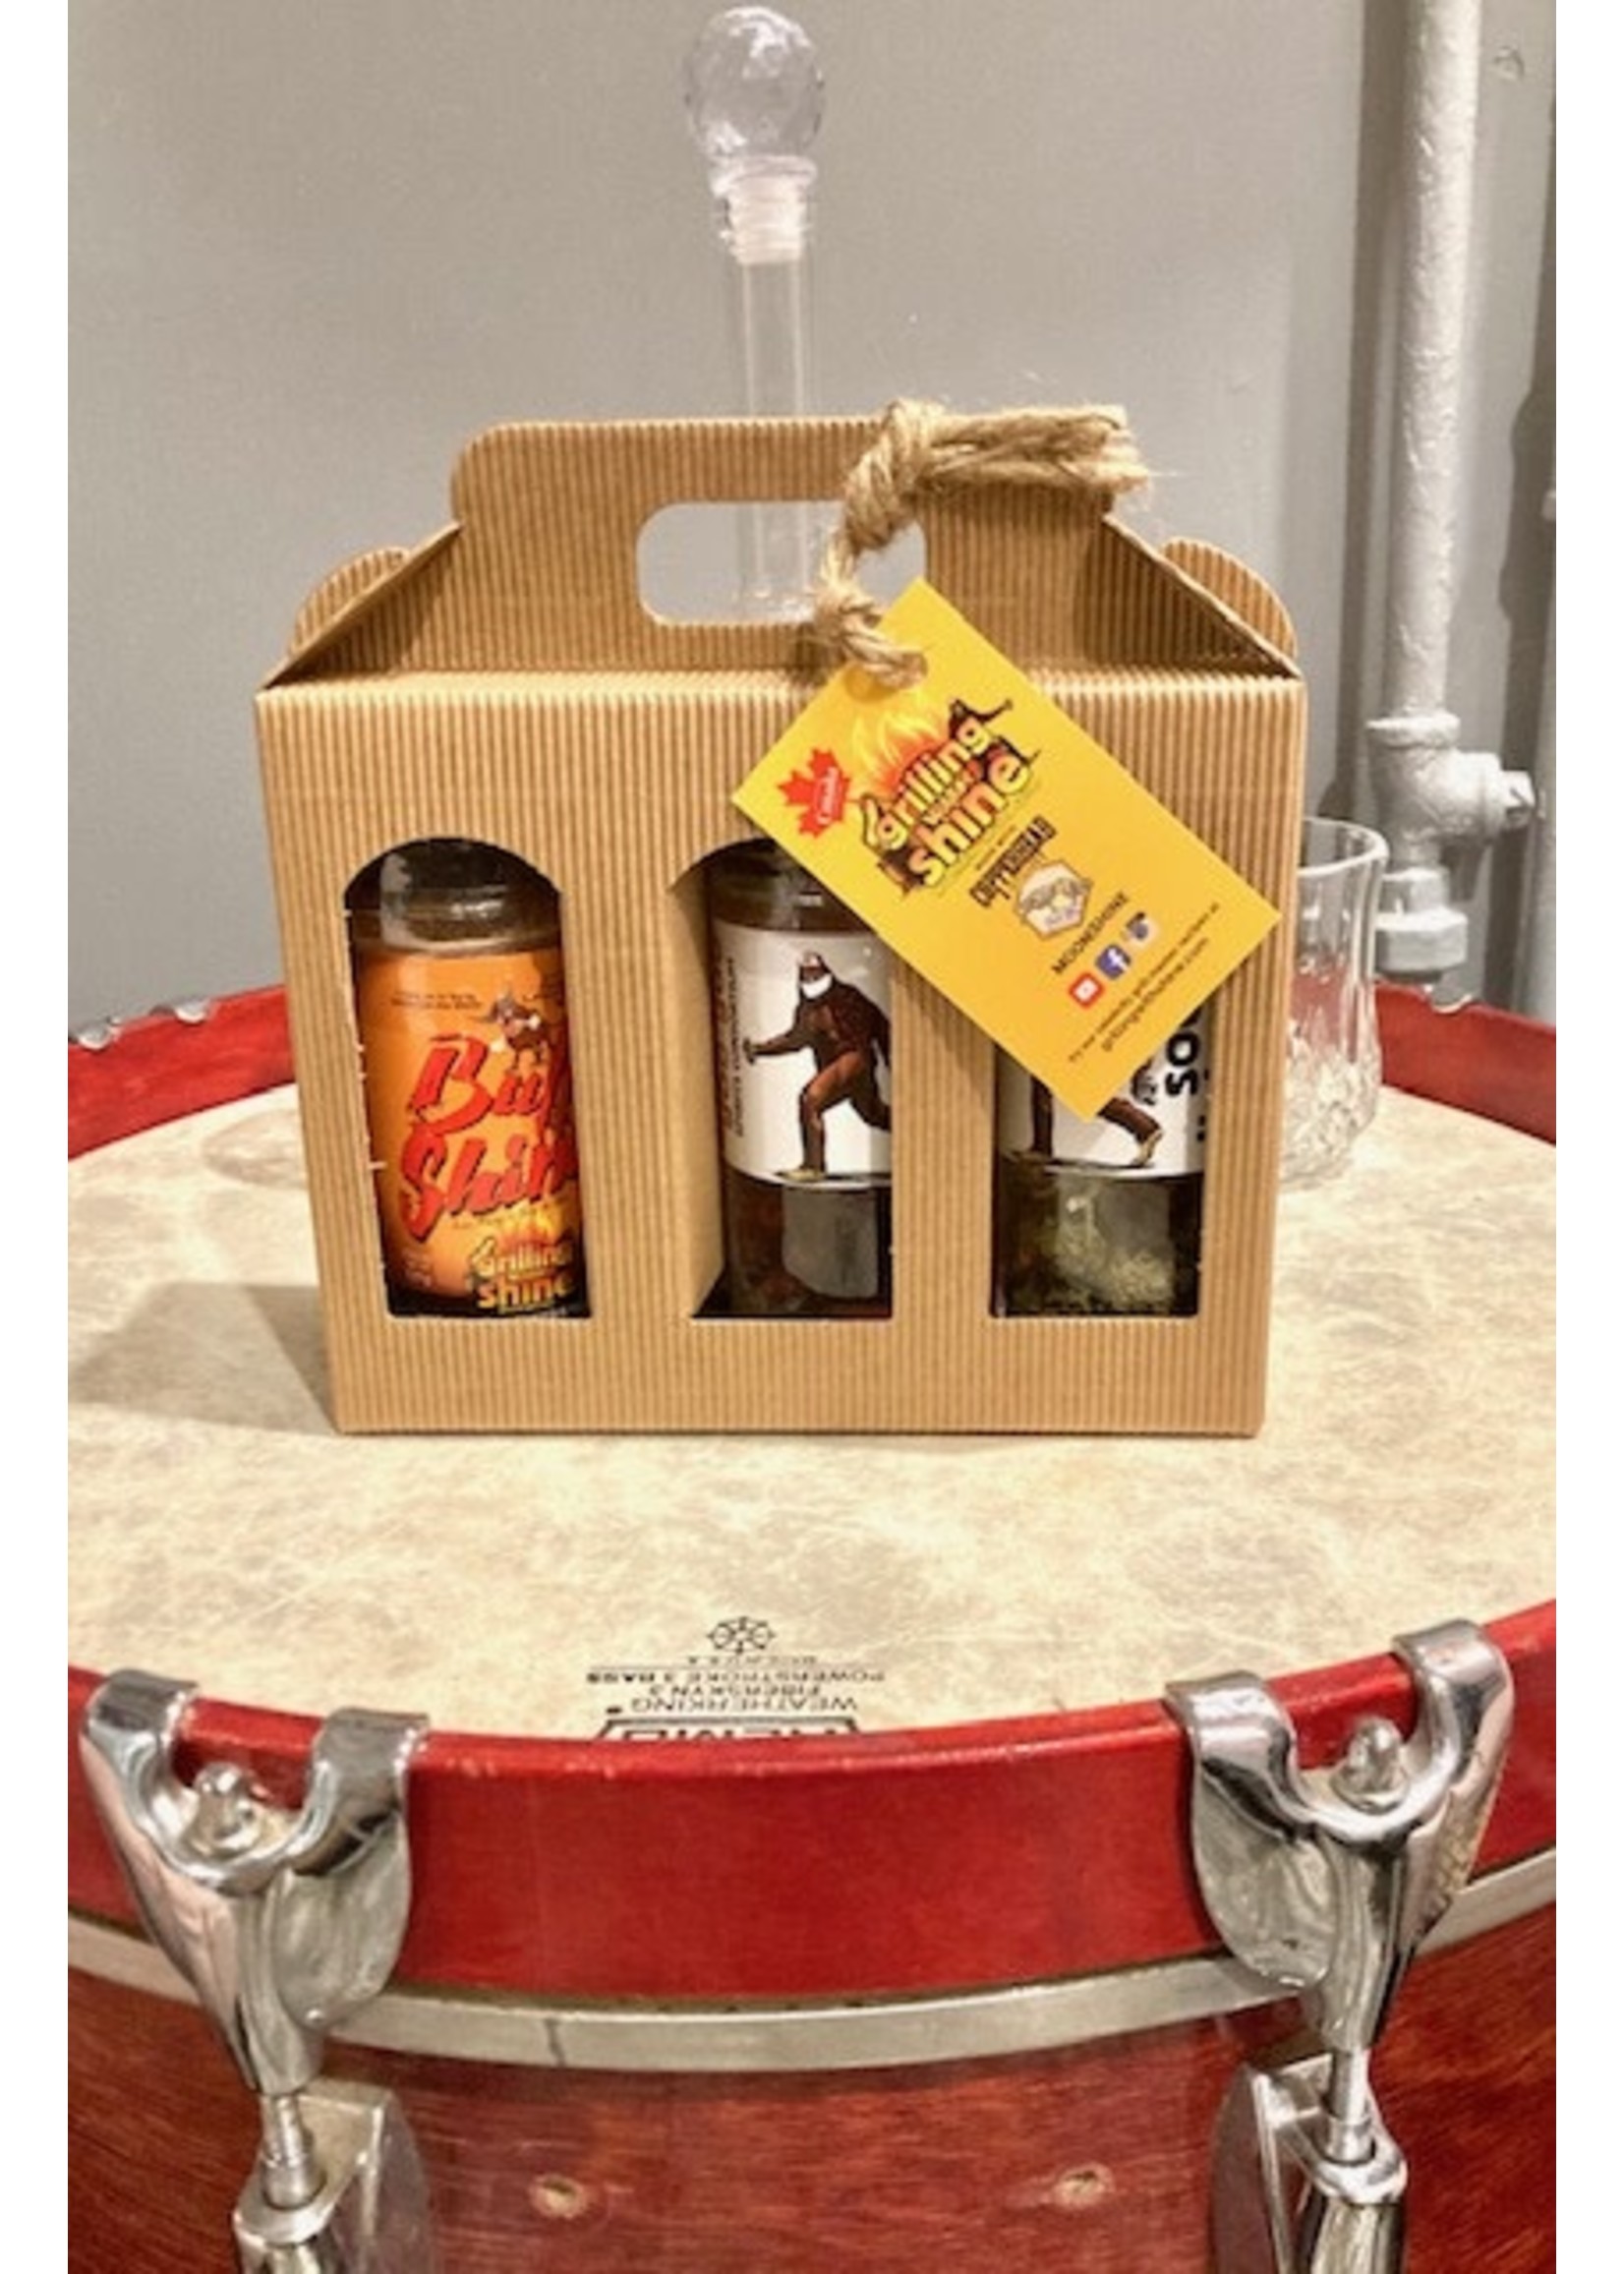 Grilling with Shine Social Distance Moonshine infused BBQ gift pack